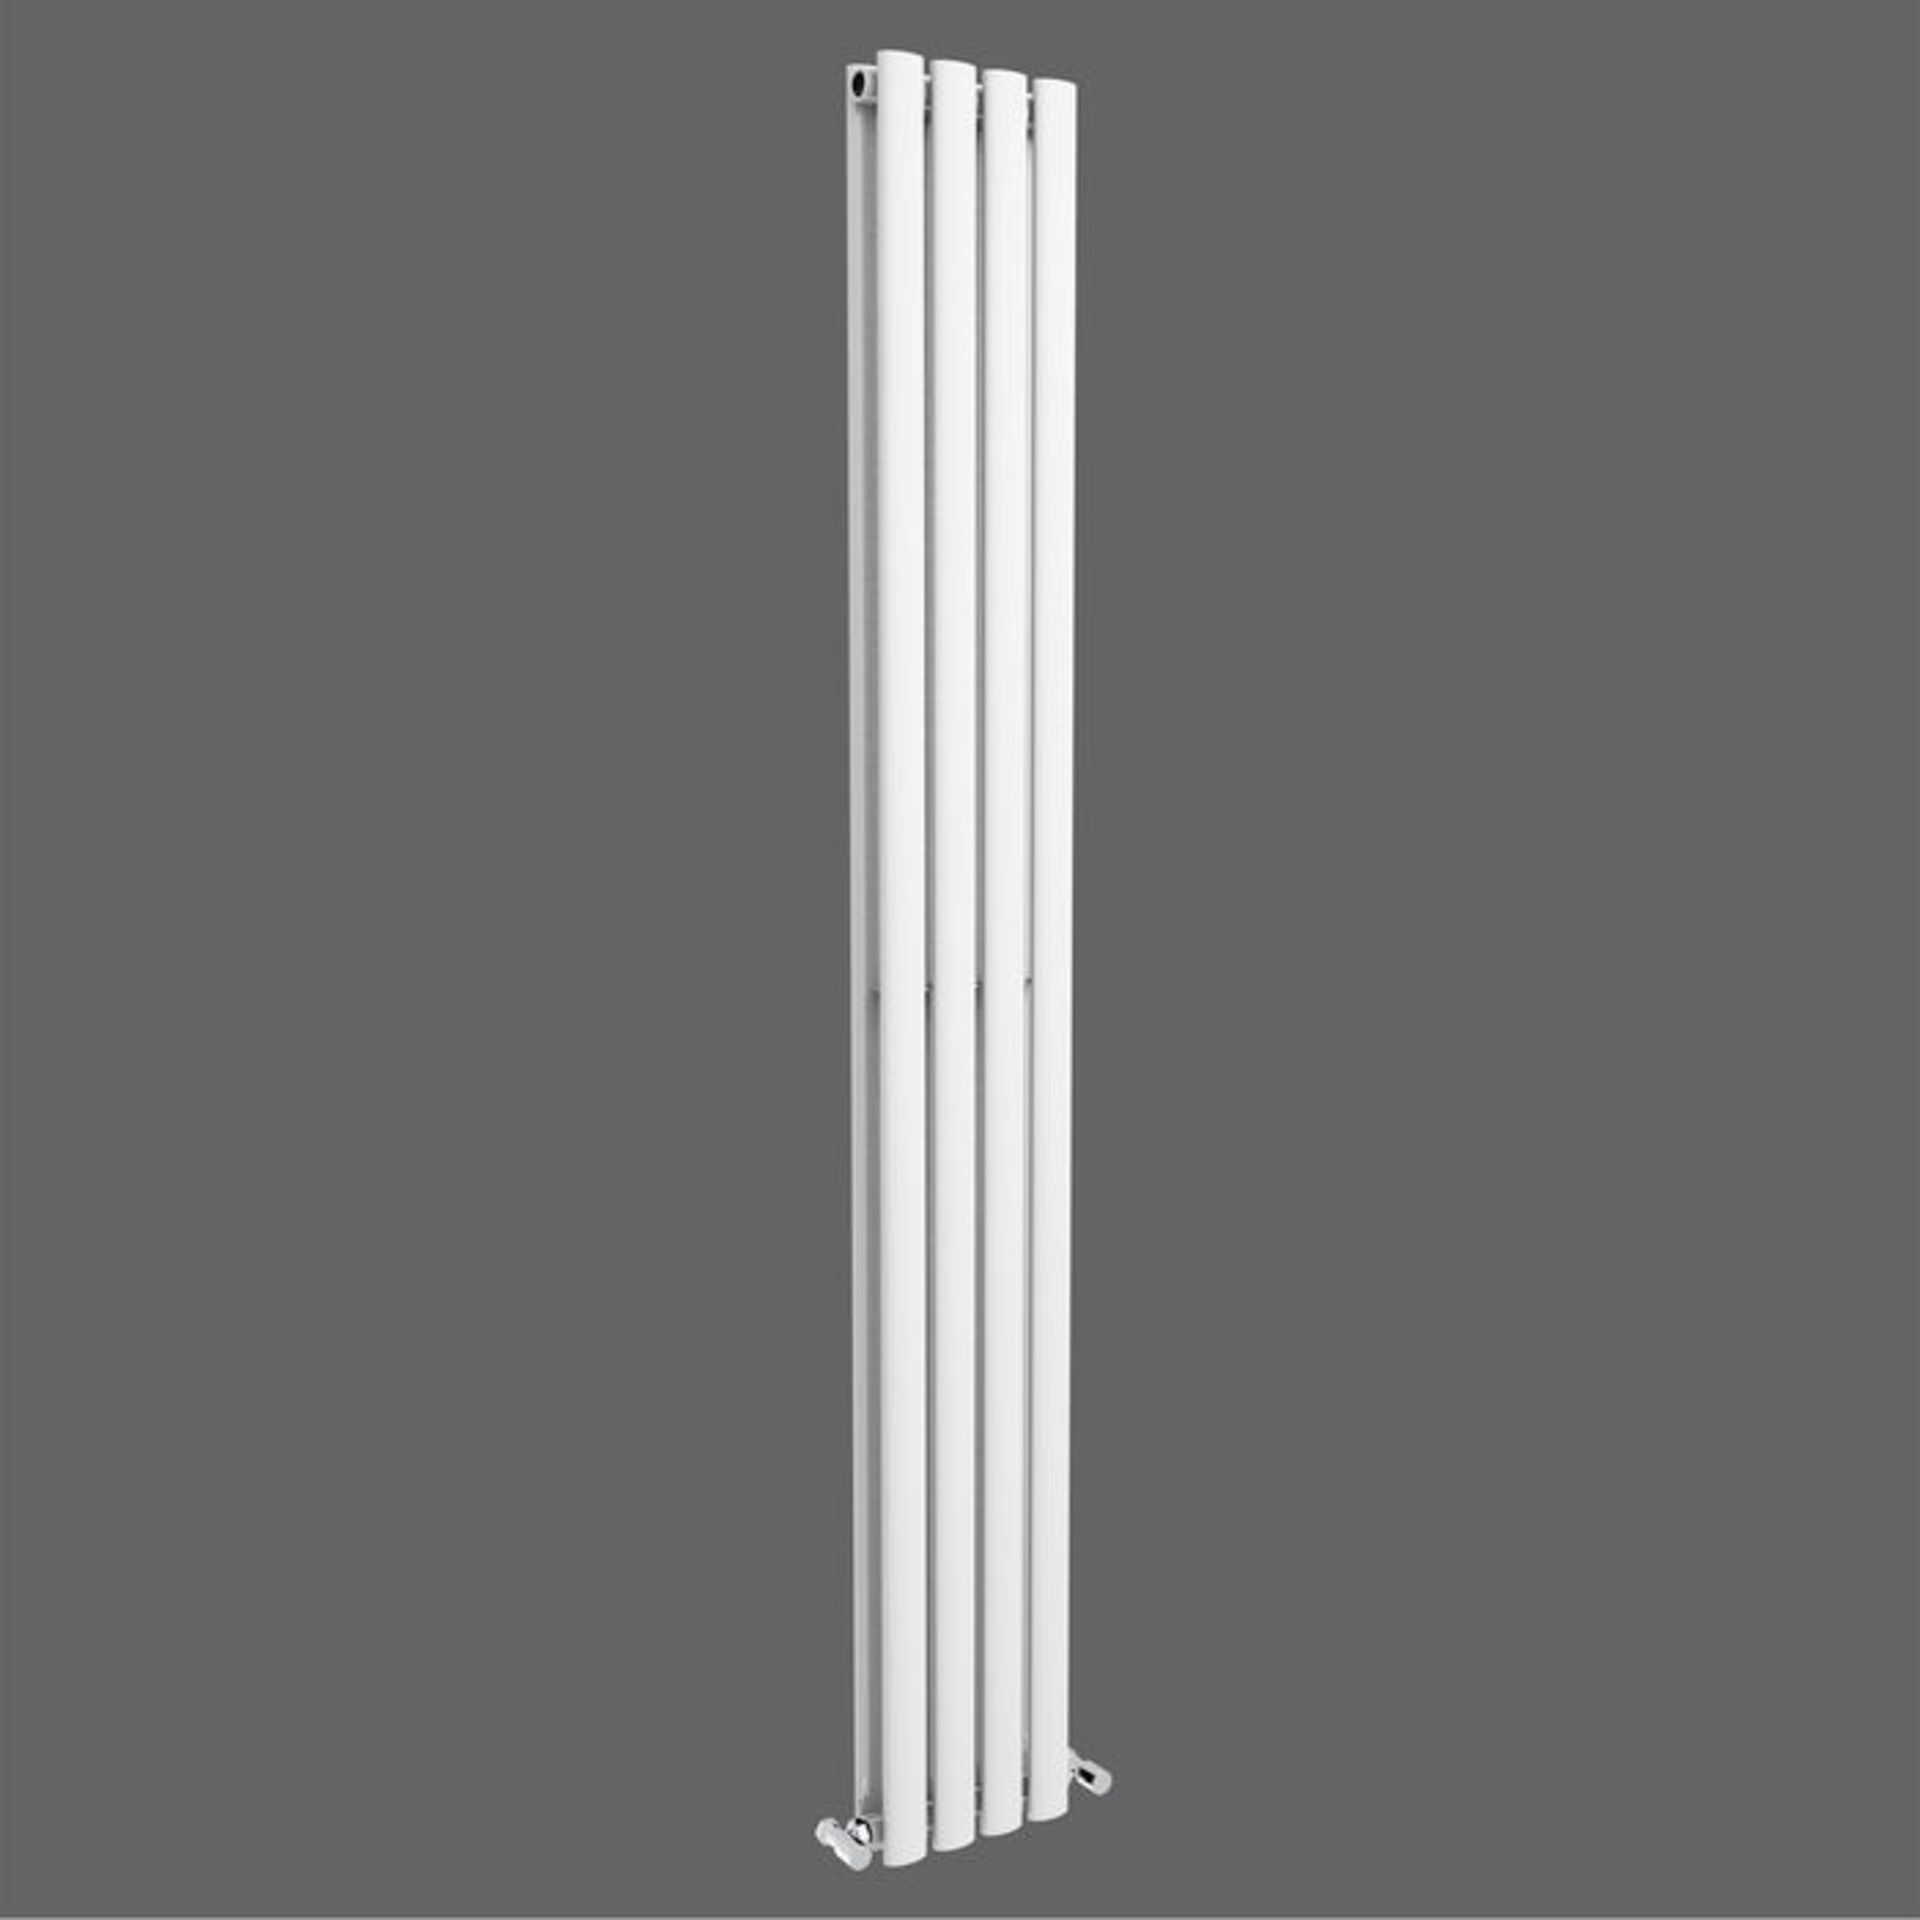 (G159) 1800x240mm Gloss White Double Oval Tube Vertical Radiator. RRP £349.99. Made from high ...( - Image 3 of 3